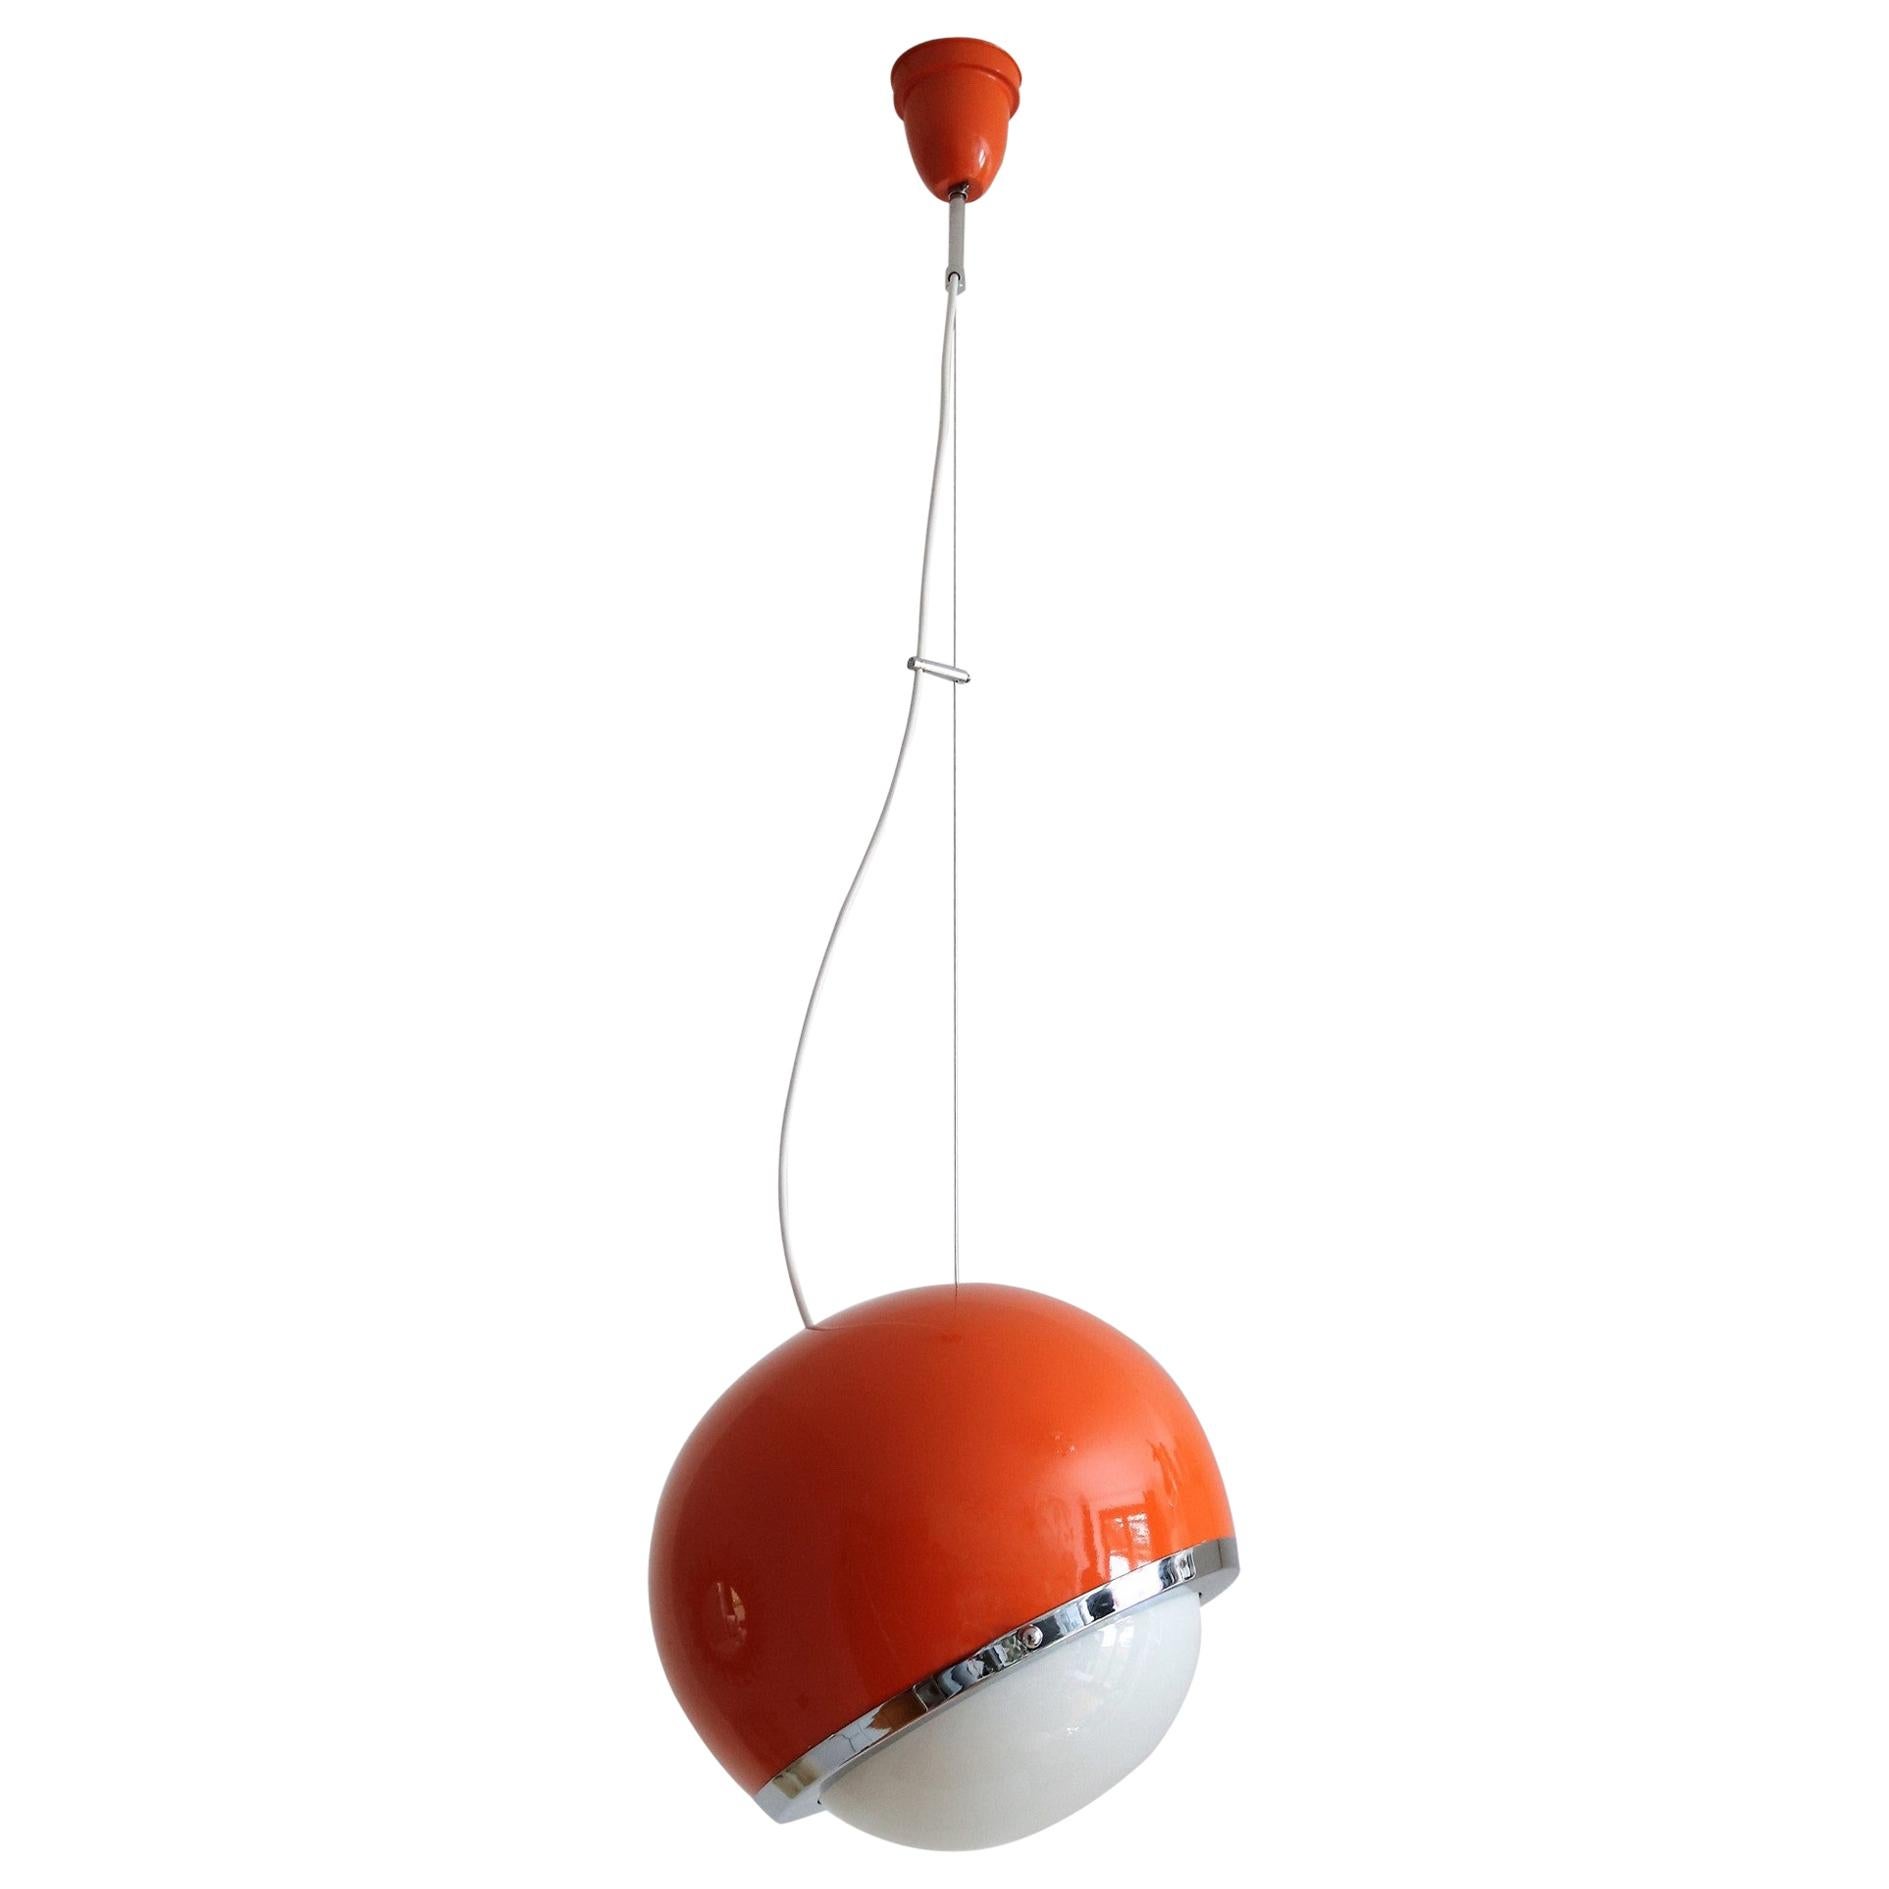 Italian Midcentury Pendant Lamp from the Space Age in Glass and Aluminium, 1960s For Sale